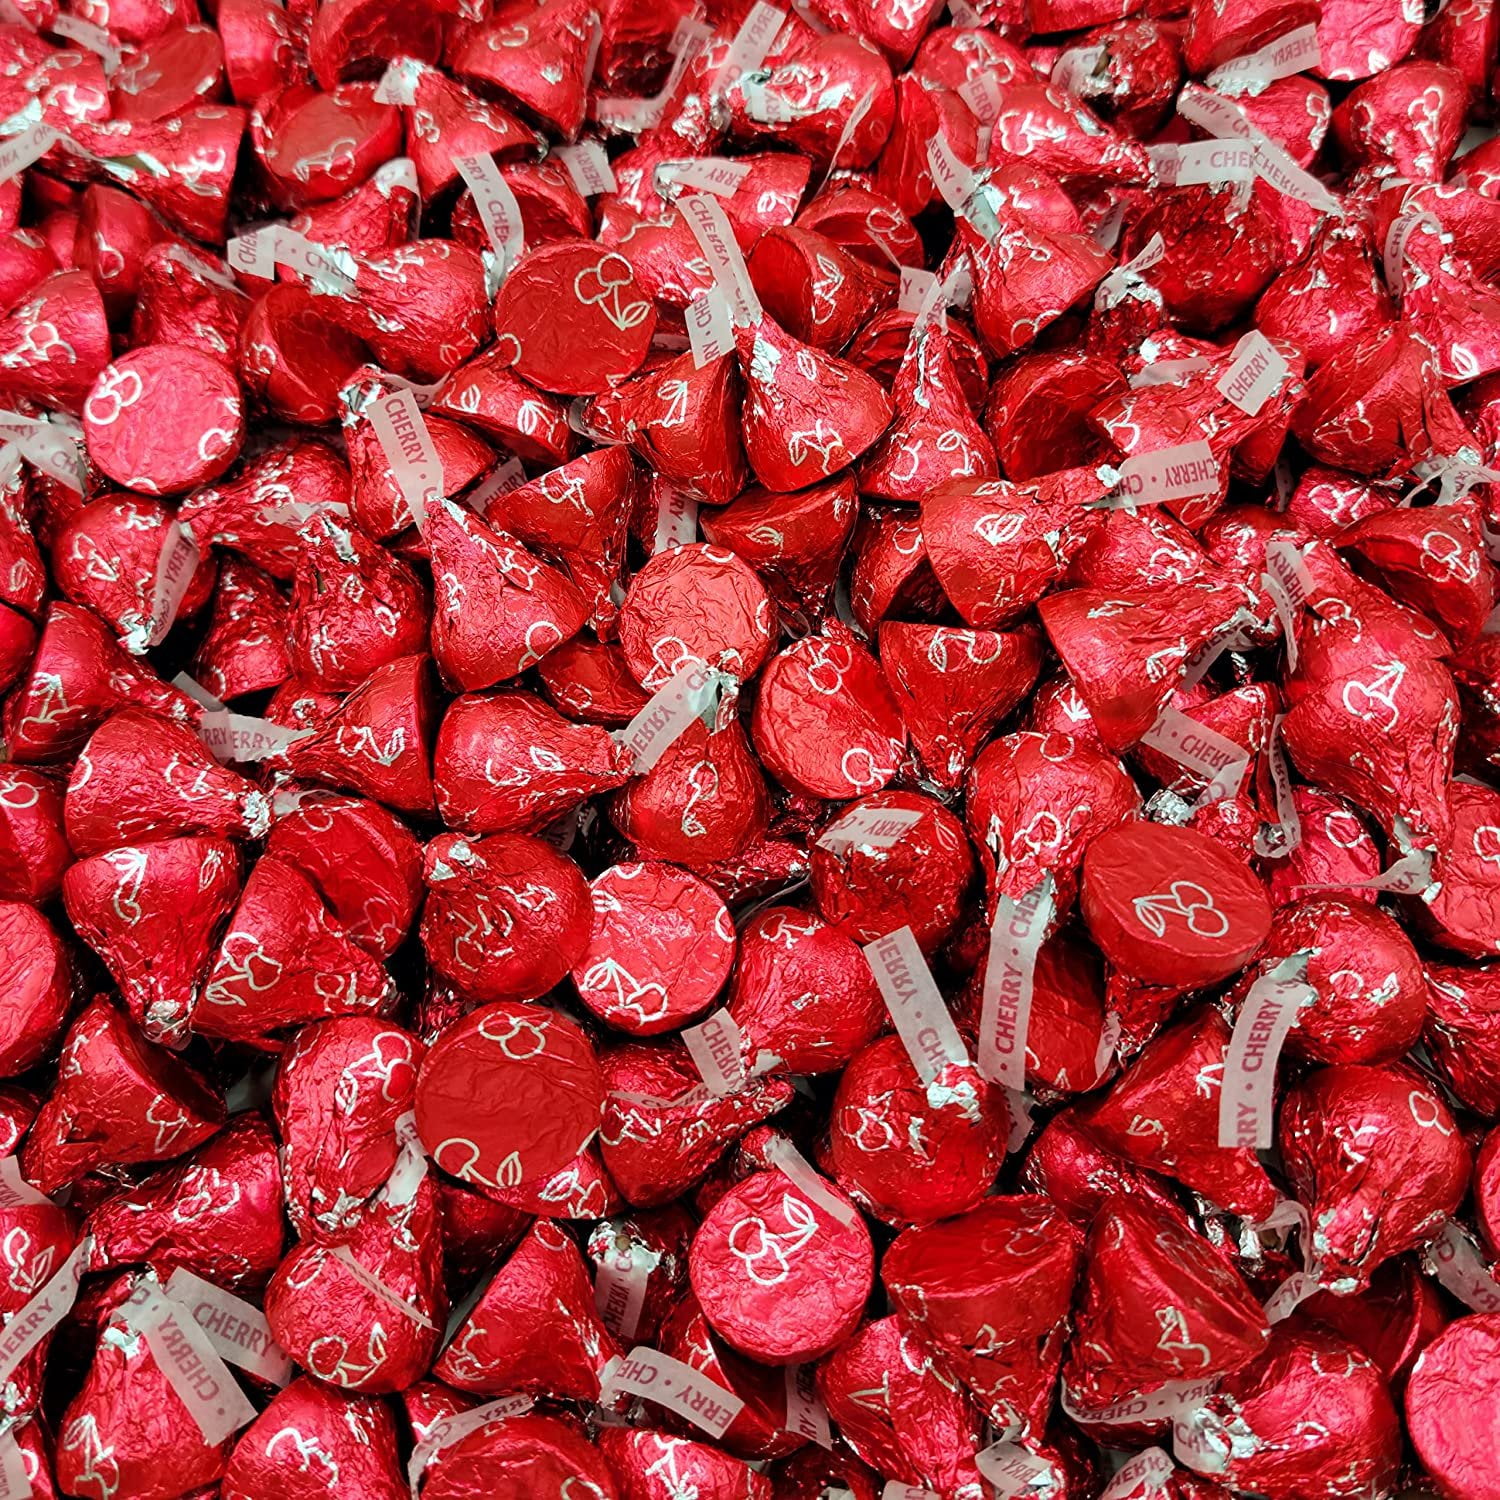 Hersheys Kisses Cherry Cordial Milk Chocolate Filled With Cherry Cordial Creme Individually 